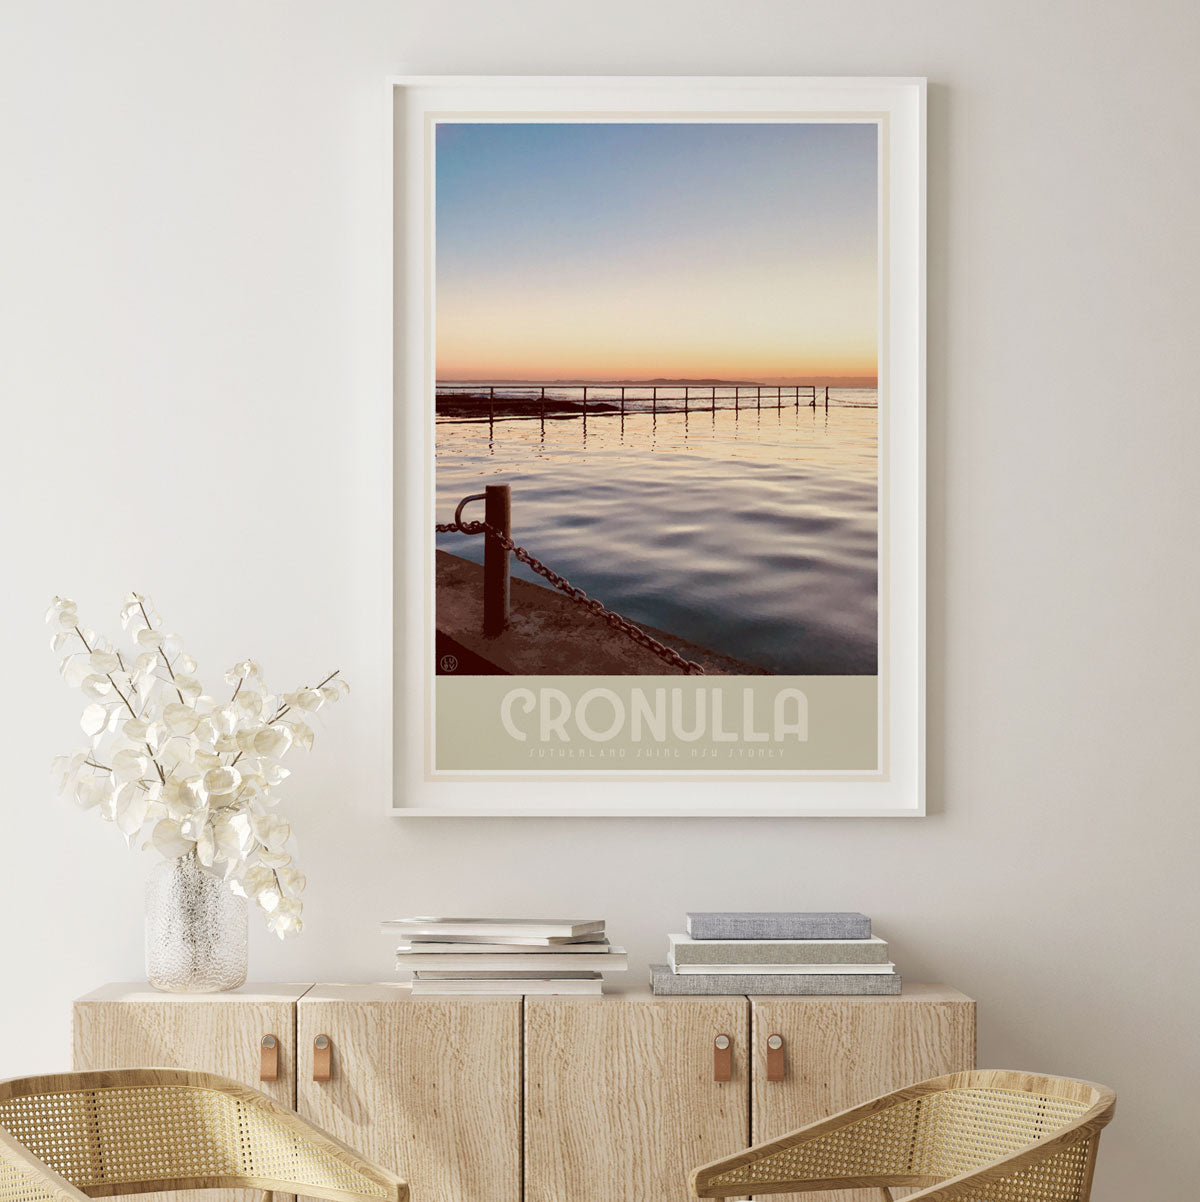 Cronulla beach pool vintage travel style print by places we luv